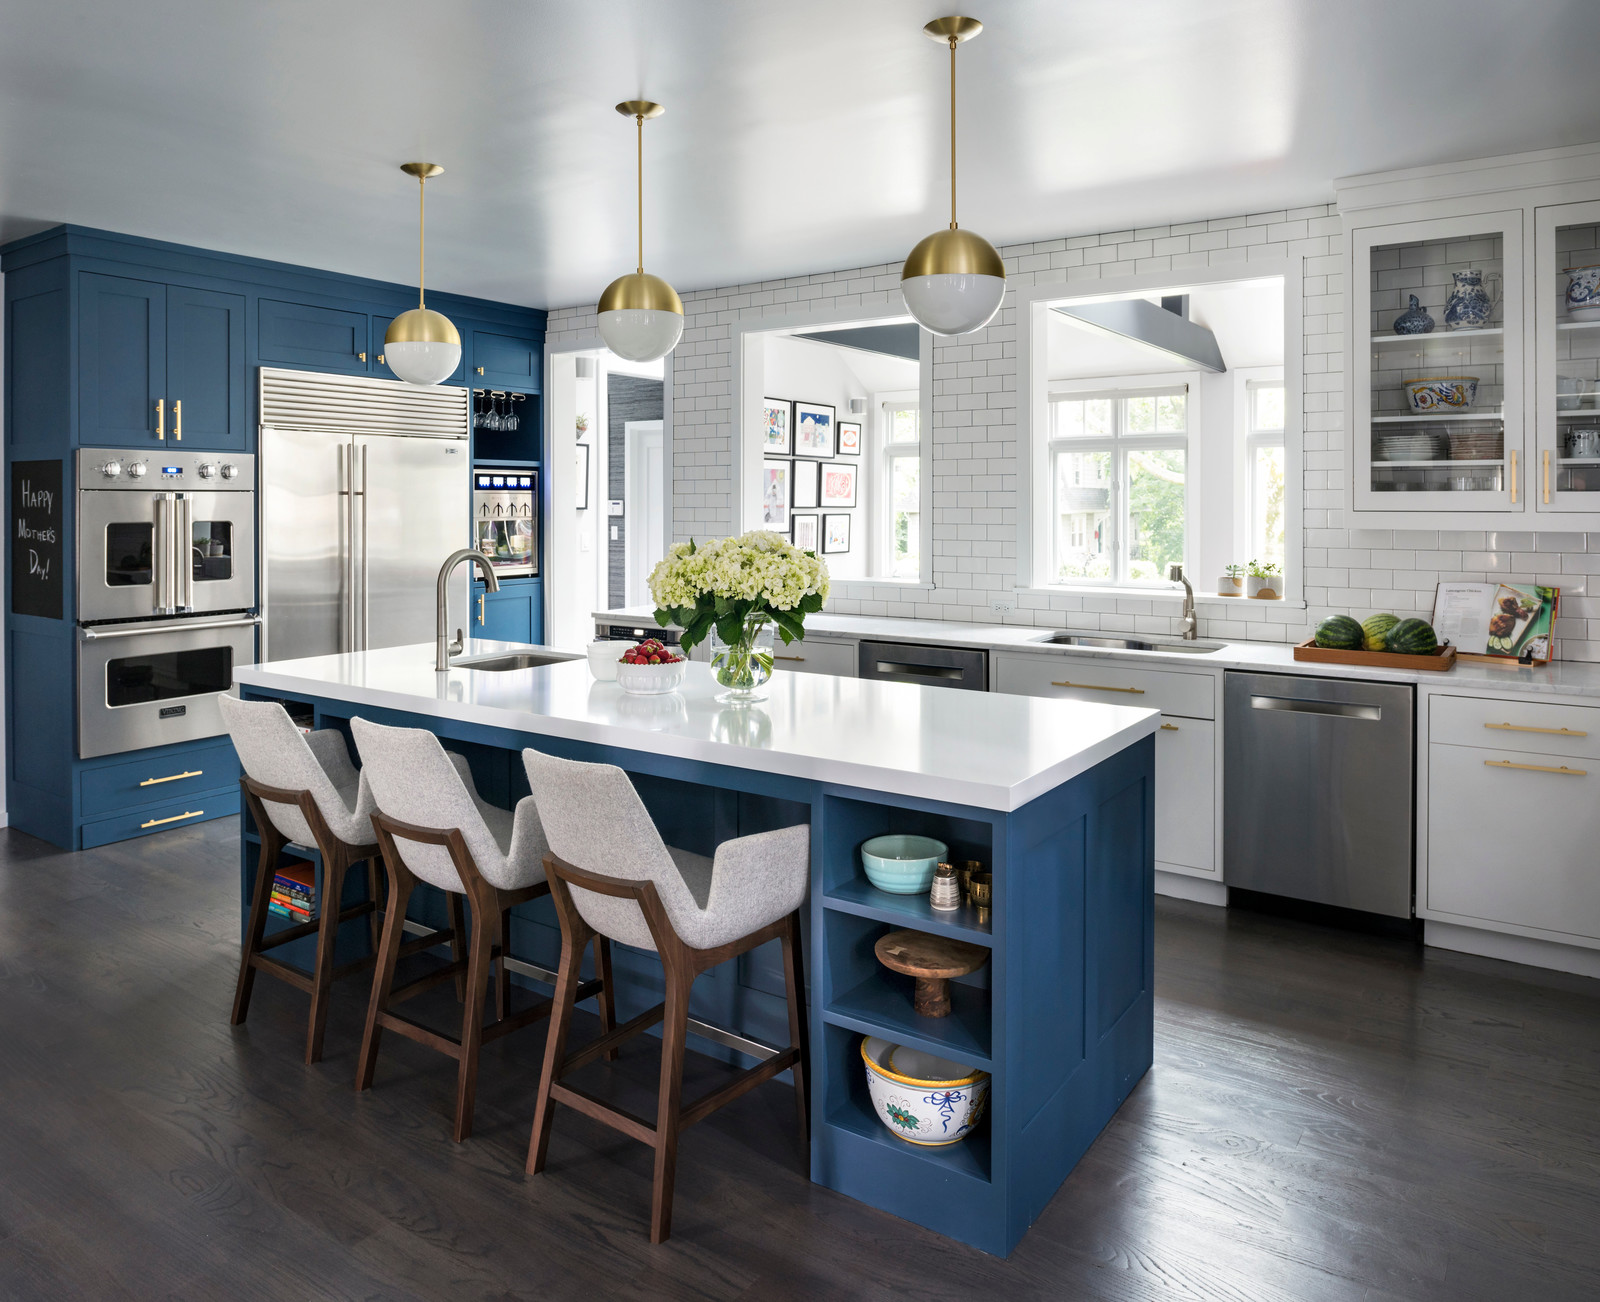 Benjamin Moore Van Deusen Blue Tall Cabinetry And Island Paired With Benjamin Moore Chantilly Lace White Kitchen Cabinets For A Mid Century Look 